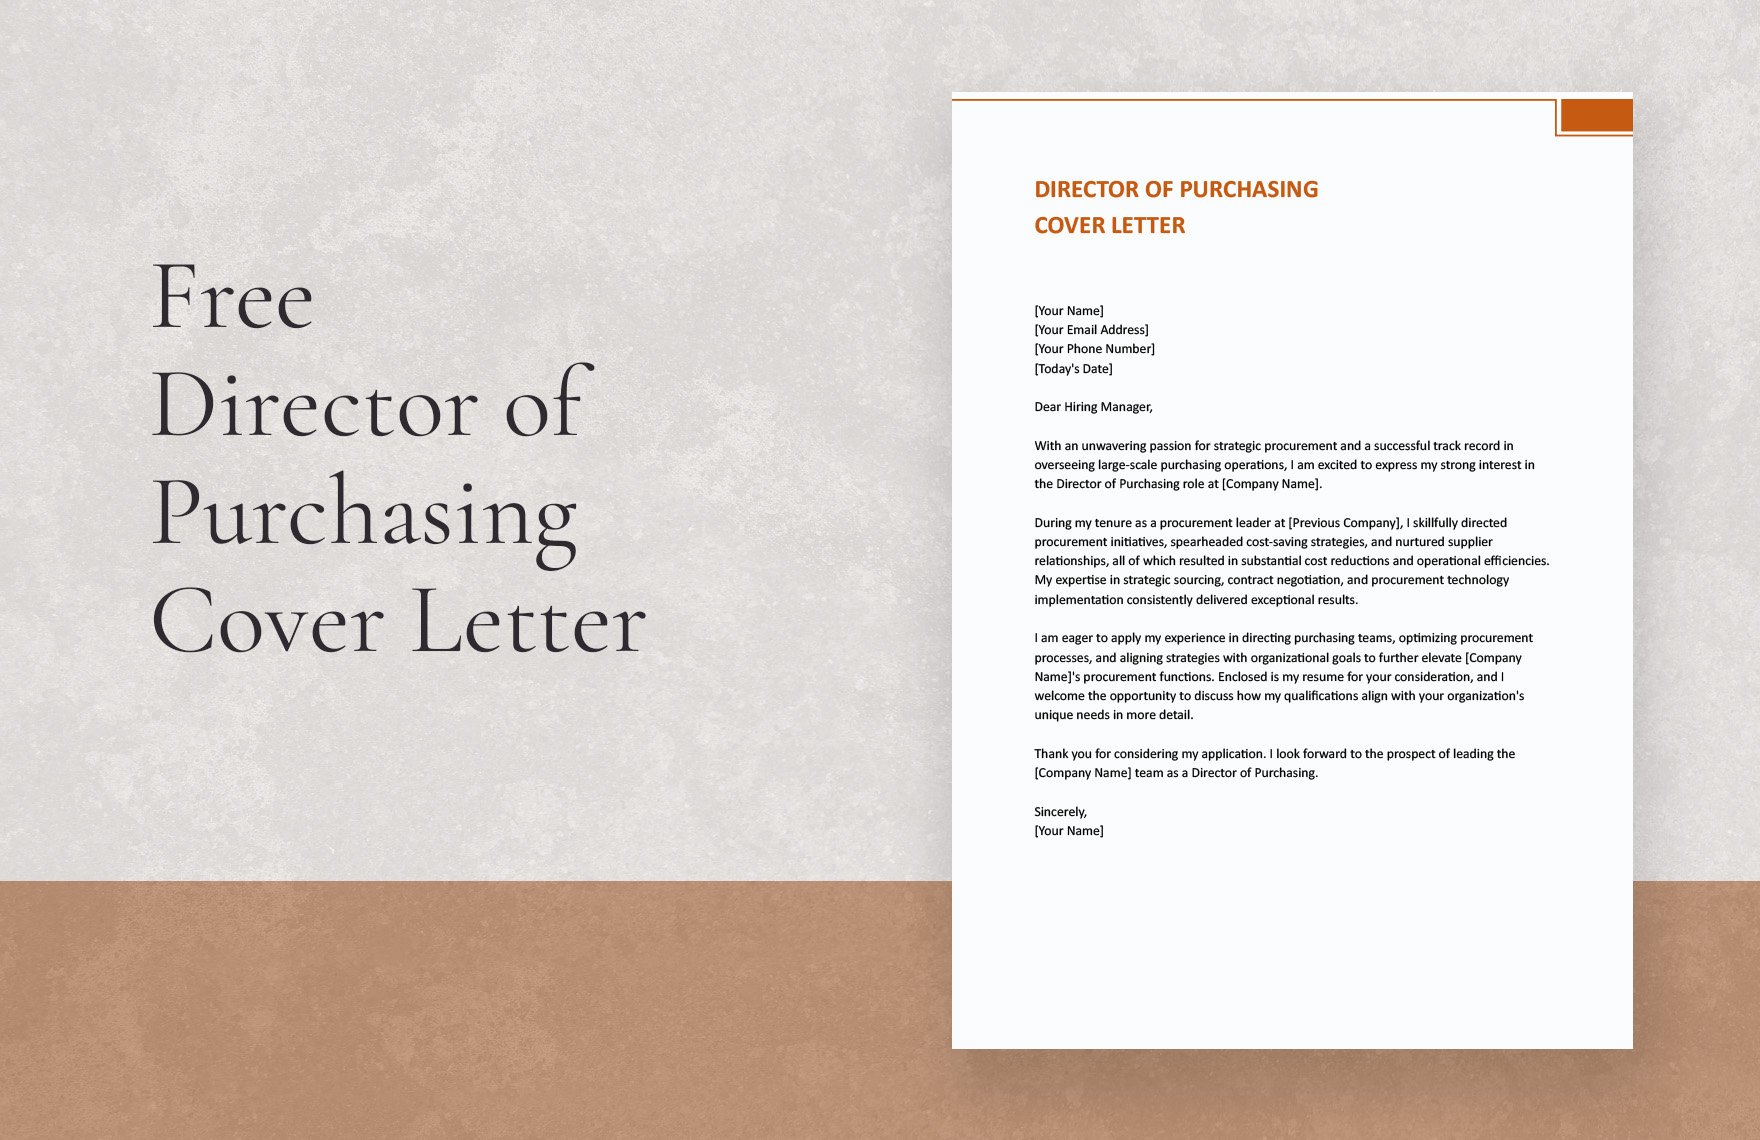 Director of Purchasing Cover Letter